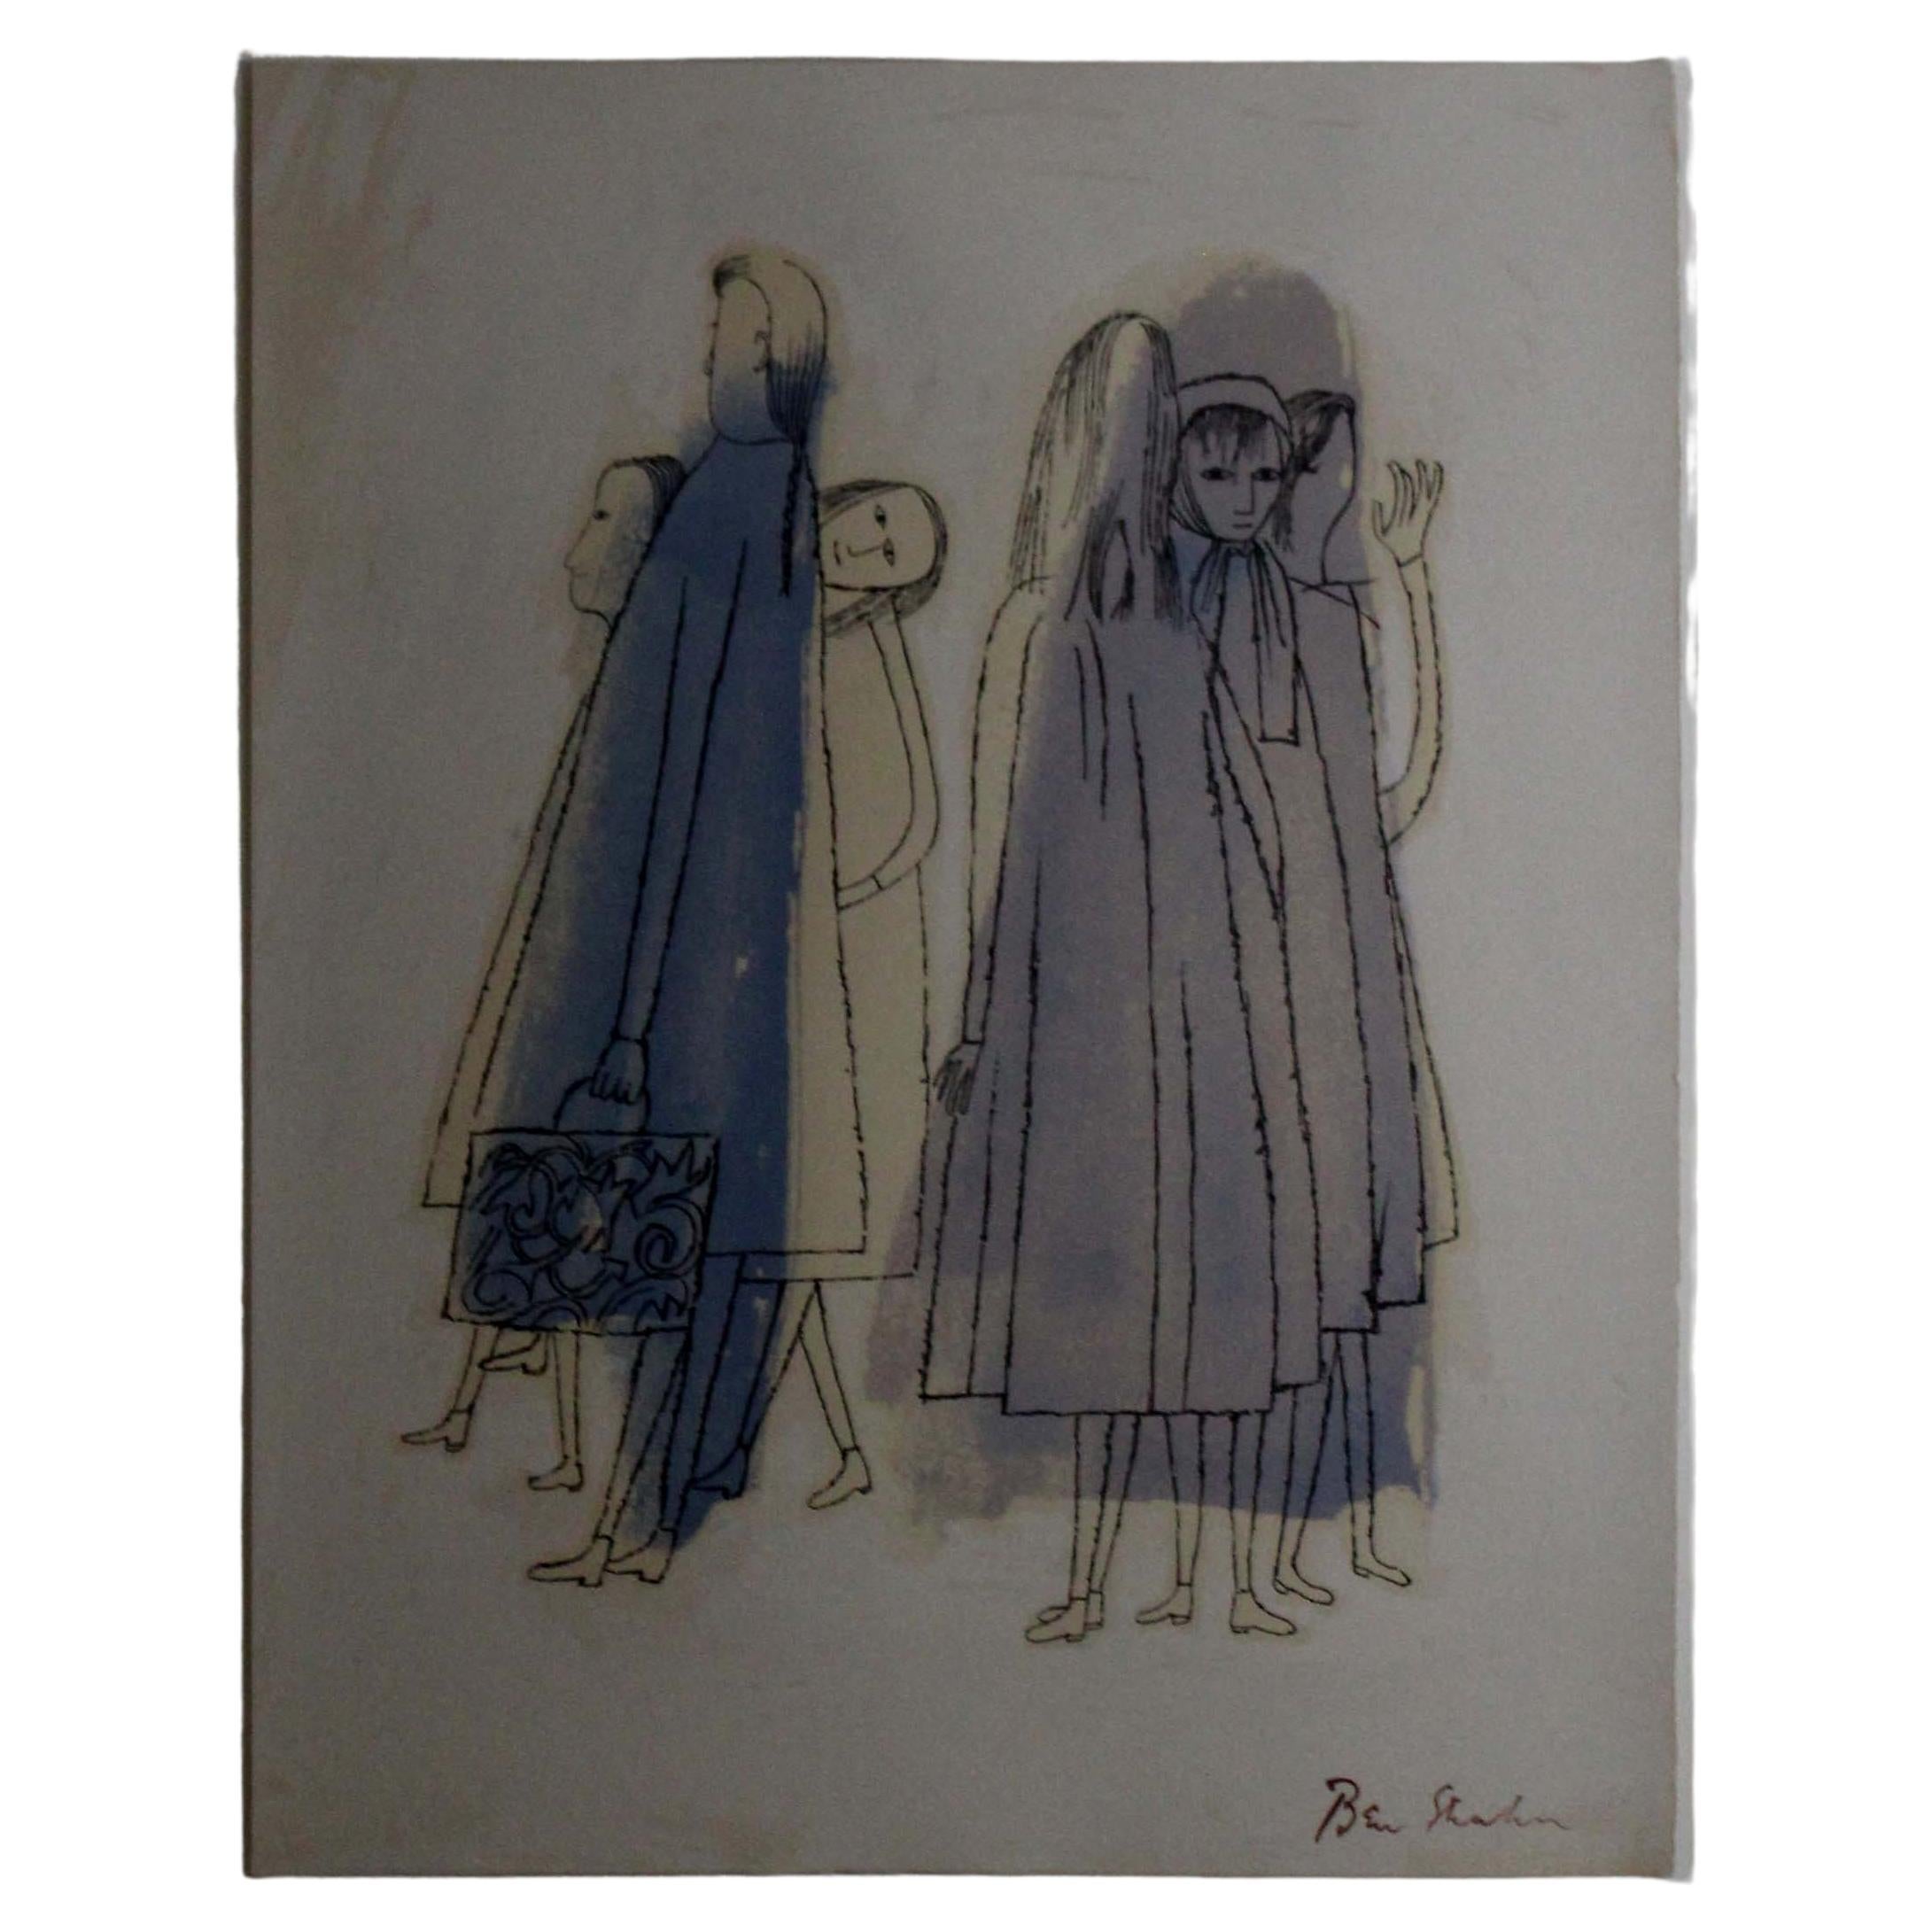 Ben Shahn To Days of Childhood That are Still Unexplained, signierte Lithographie 1968 im Angebot